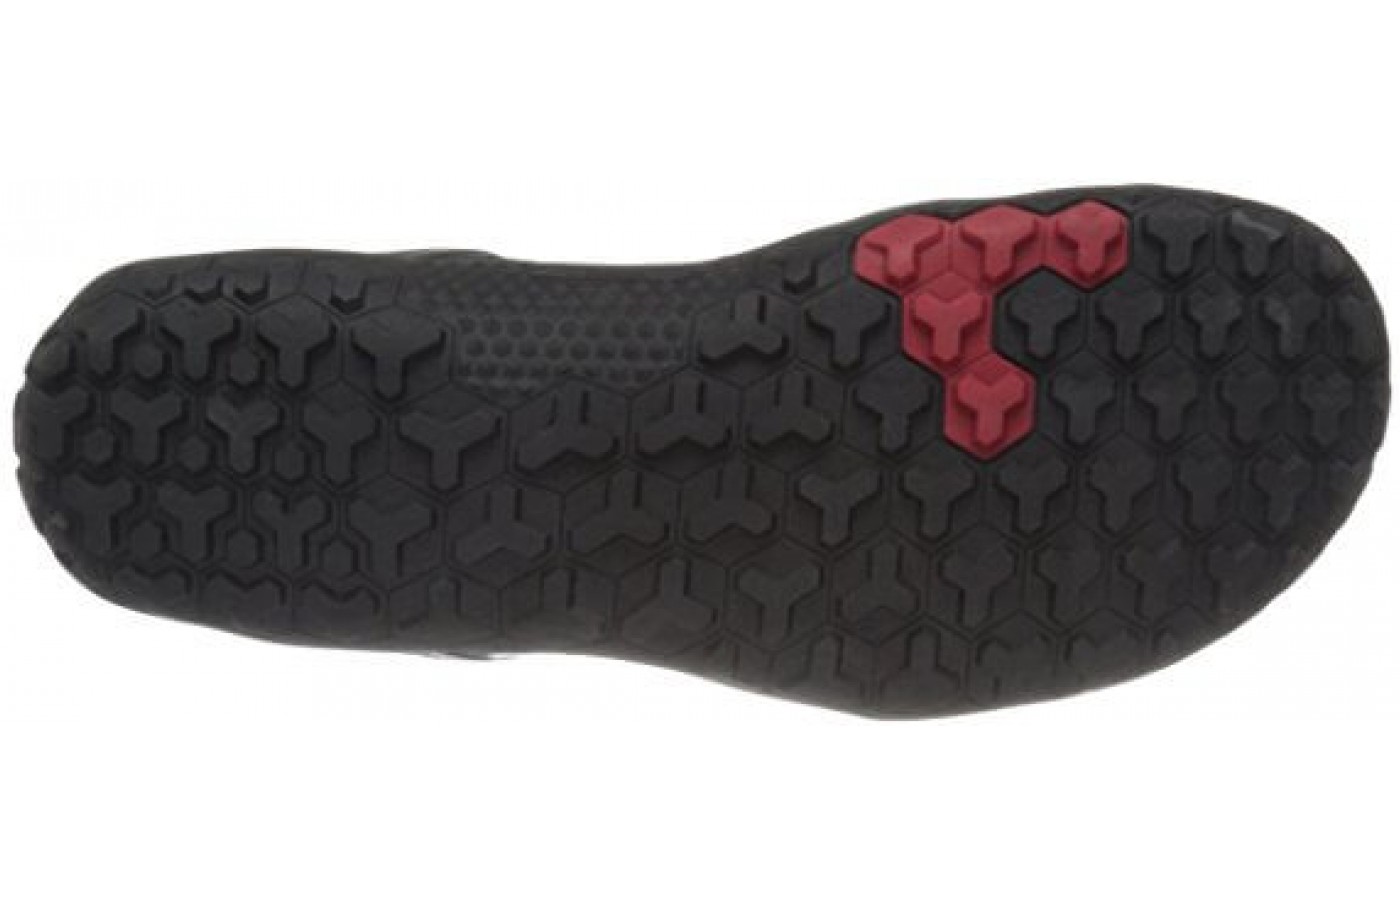 The Vivobarefoot Primus Trail FG has firm ground soles for multi terrain running